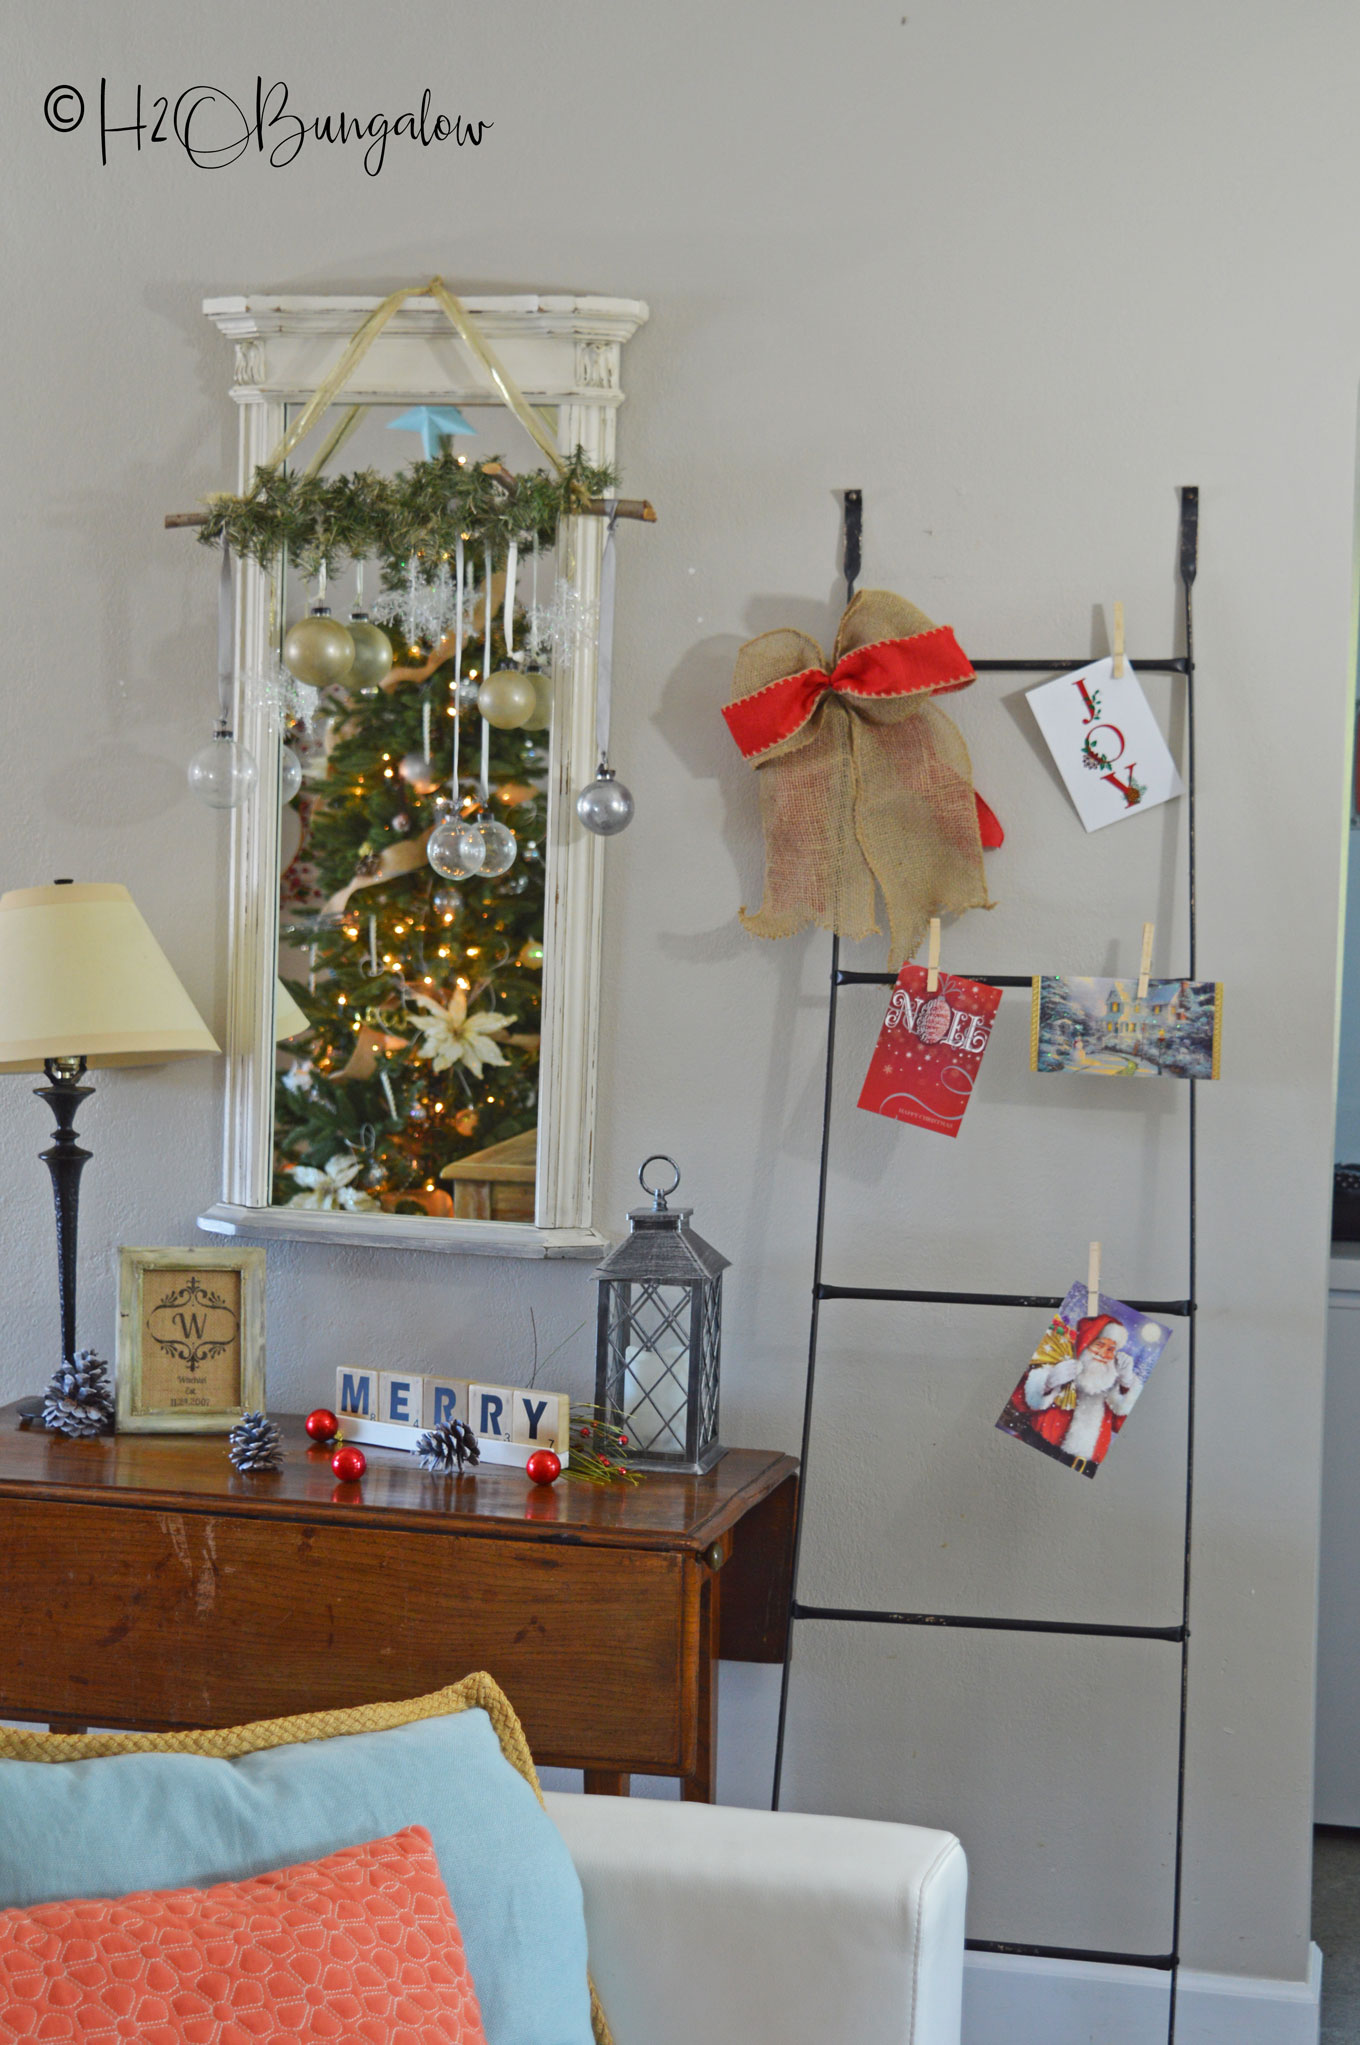 H2OBungalow Christmas home tour at the beach with several neutral holiday decor DIY projects and tutorials.